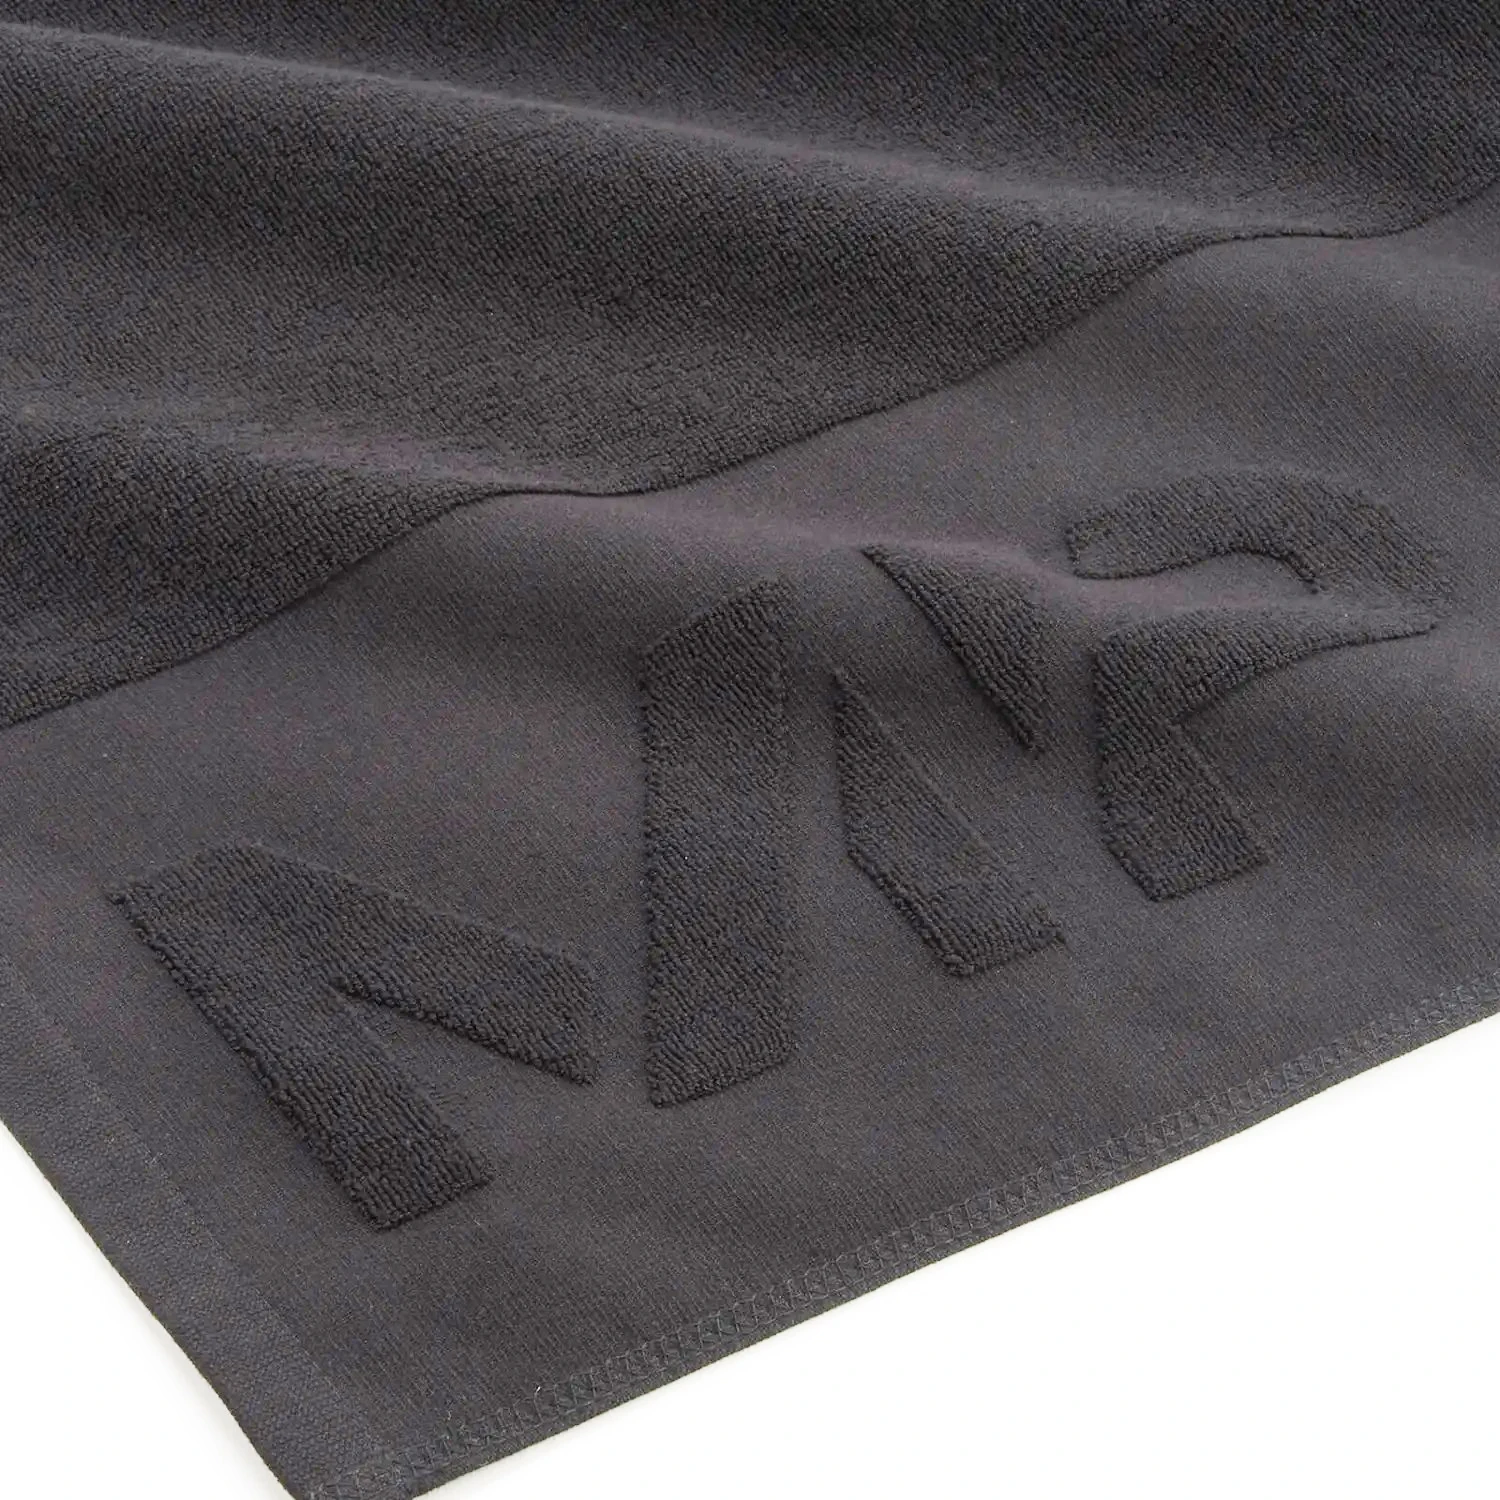 100% cotton jacquard bath towel customized woven embossed logo beach towel for pool sports gym